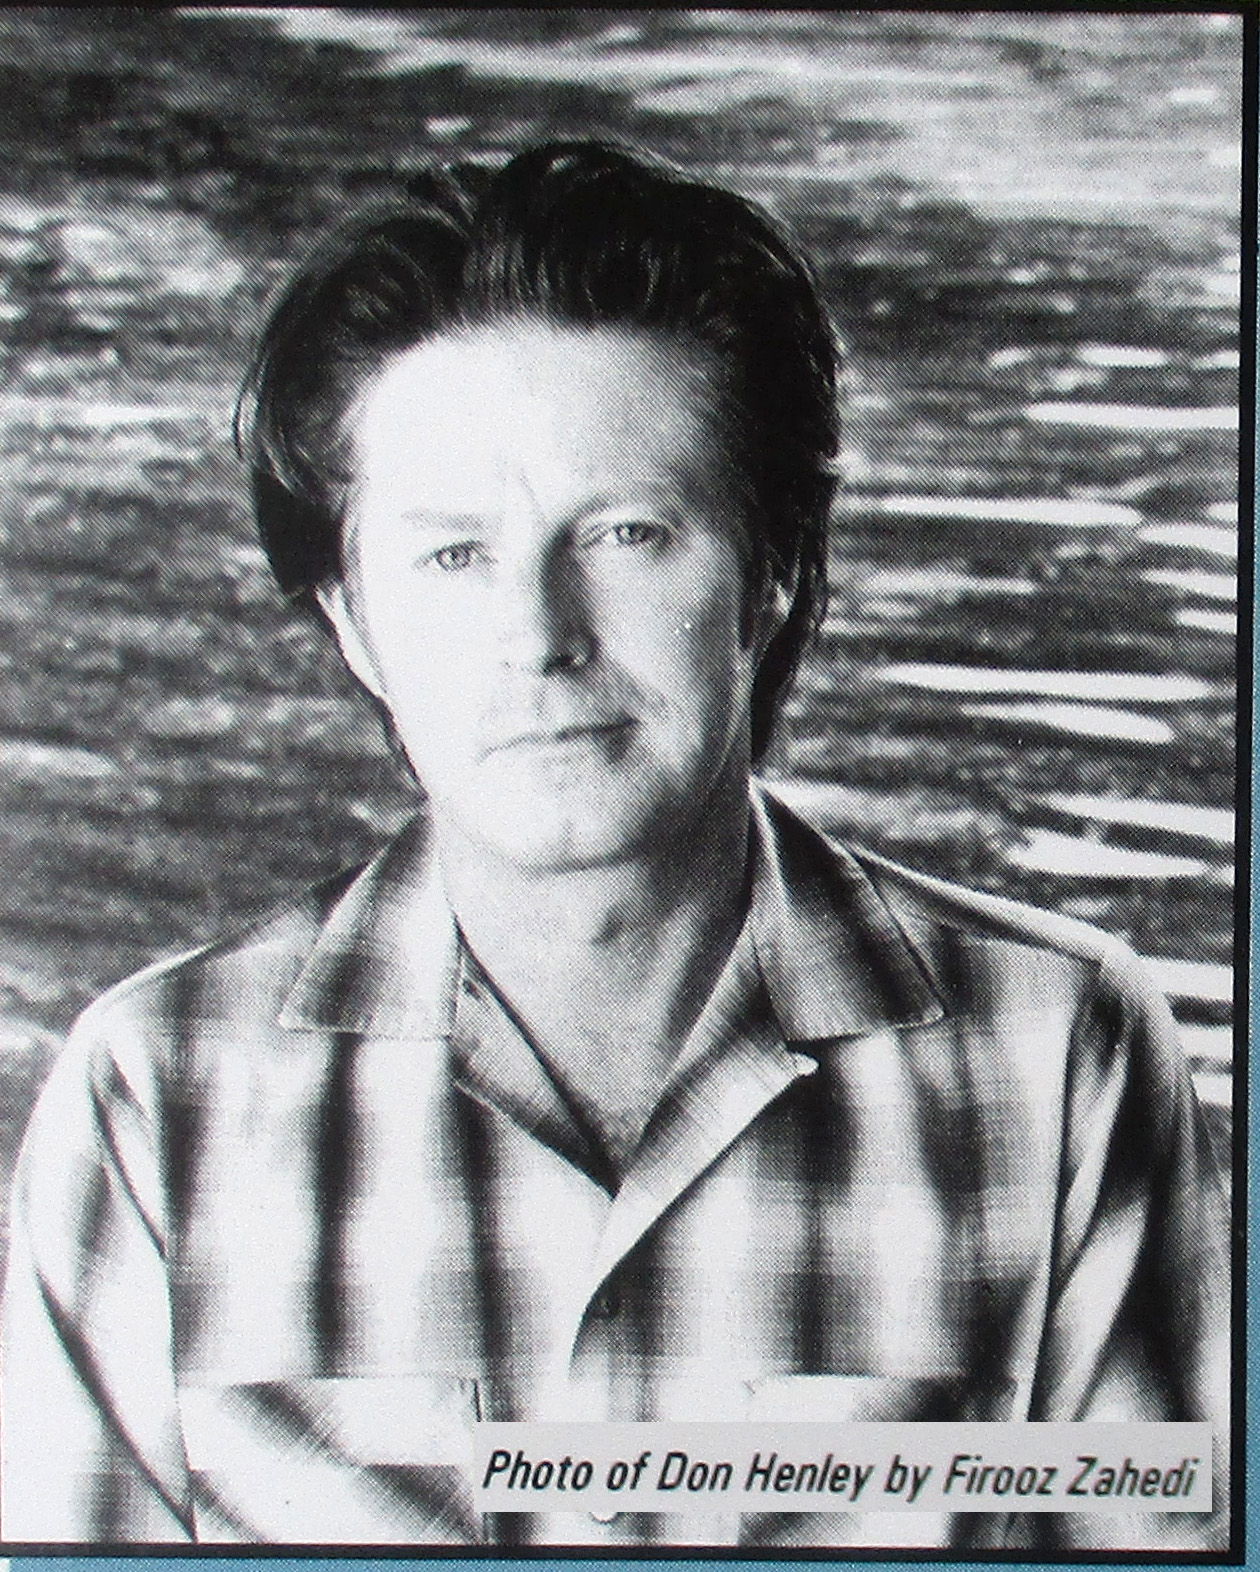 Photo of Don Henley by Firooz Zahedi